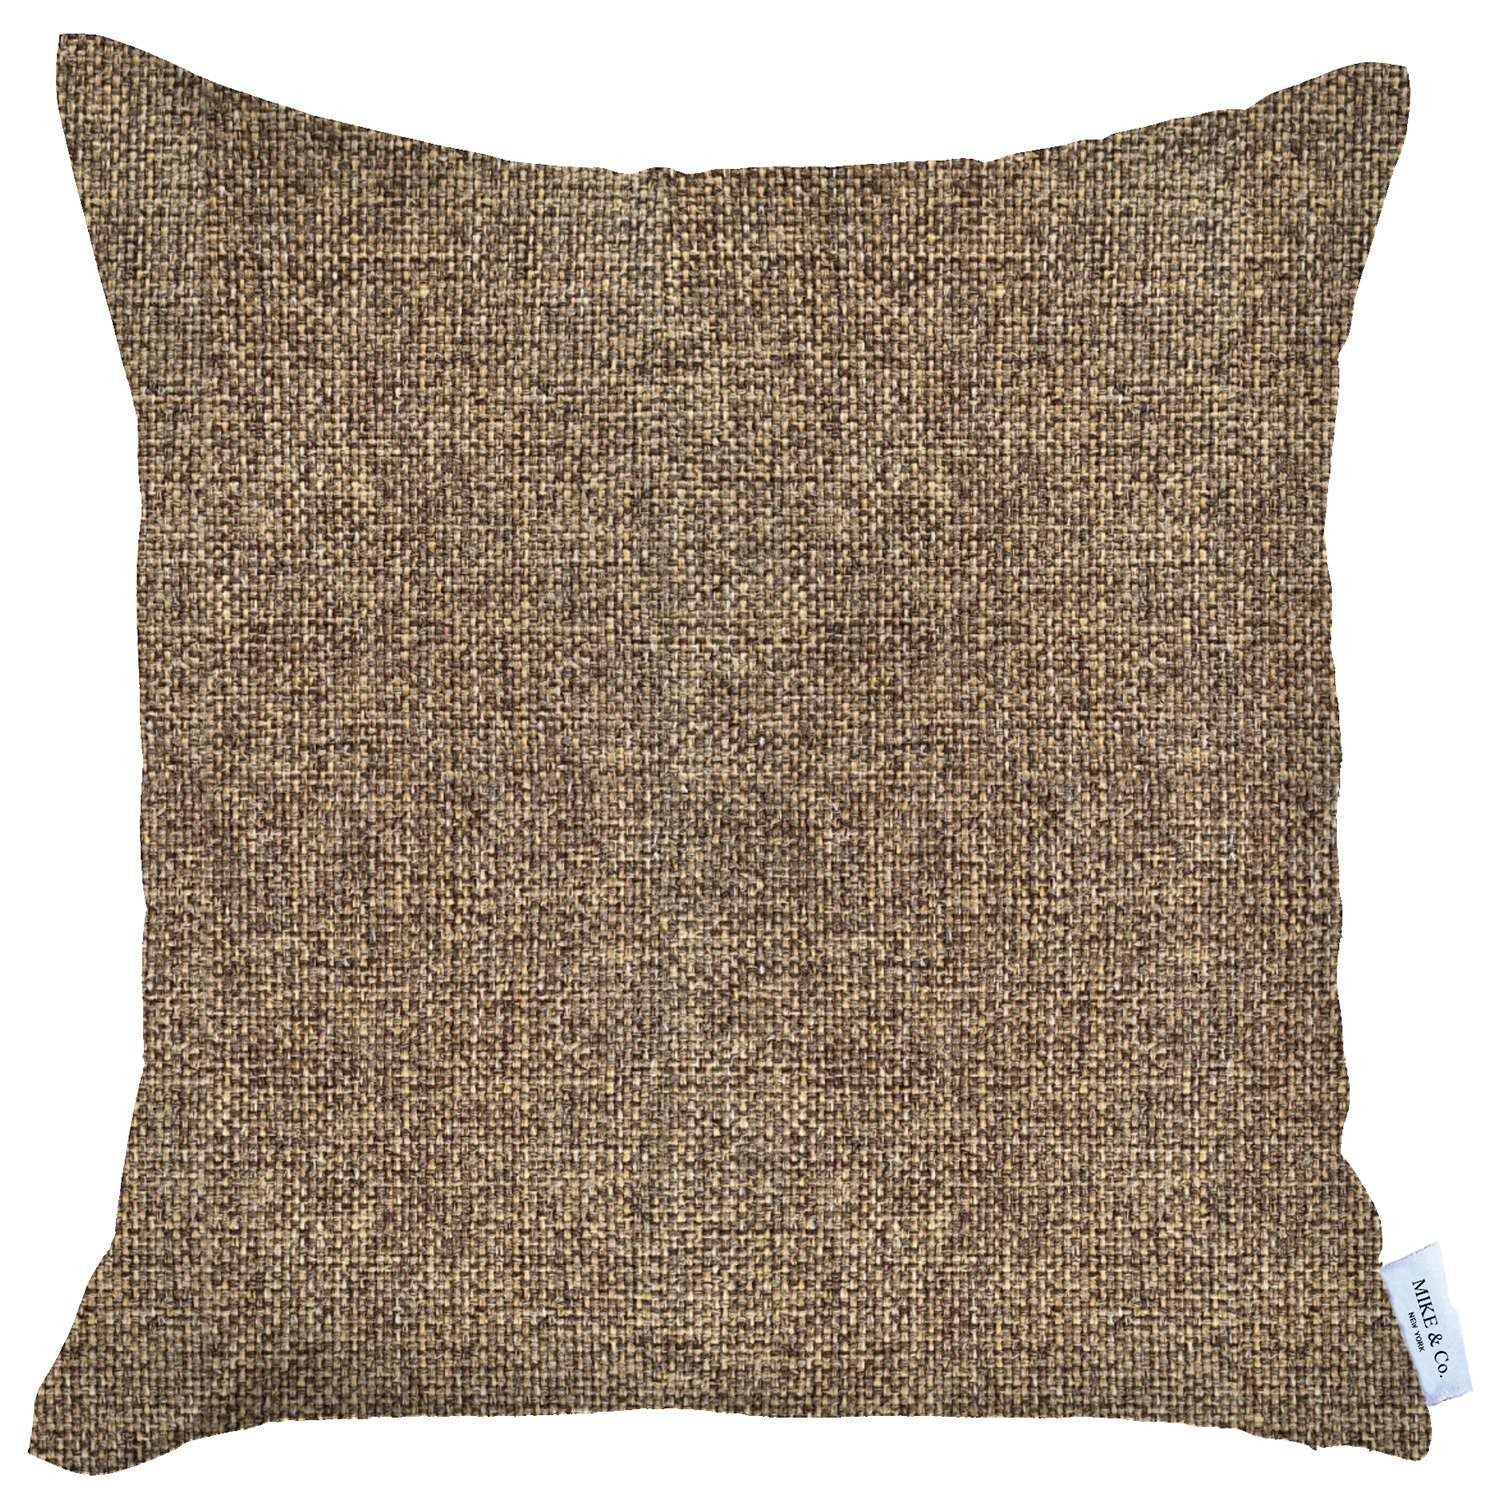 18" X 18" Brown Solid Color Zippered Handmade Polyester Throw Pillow Cover